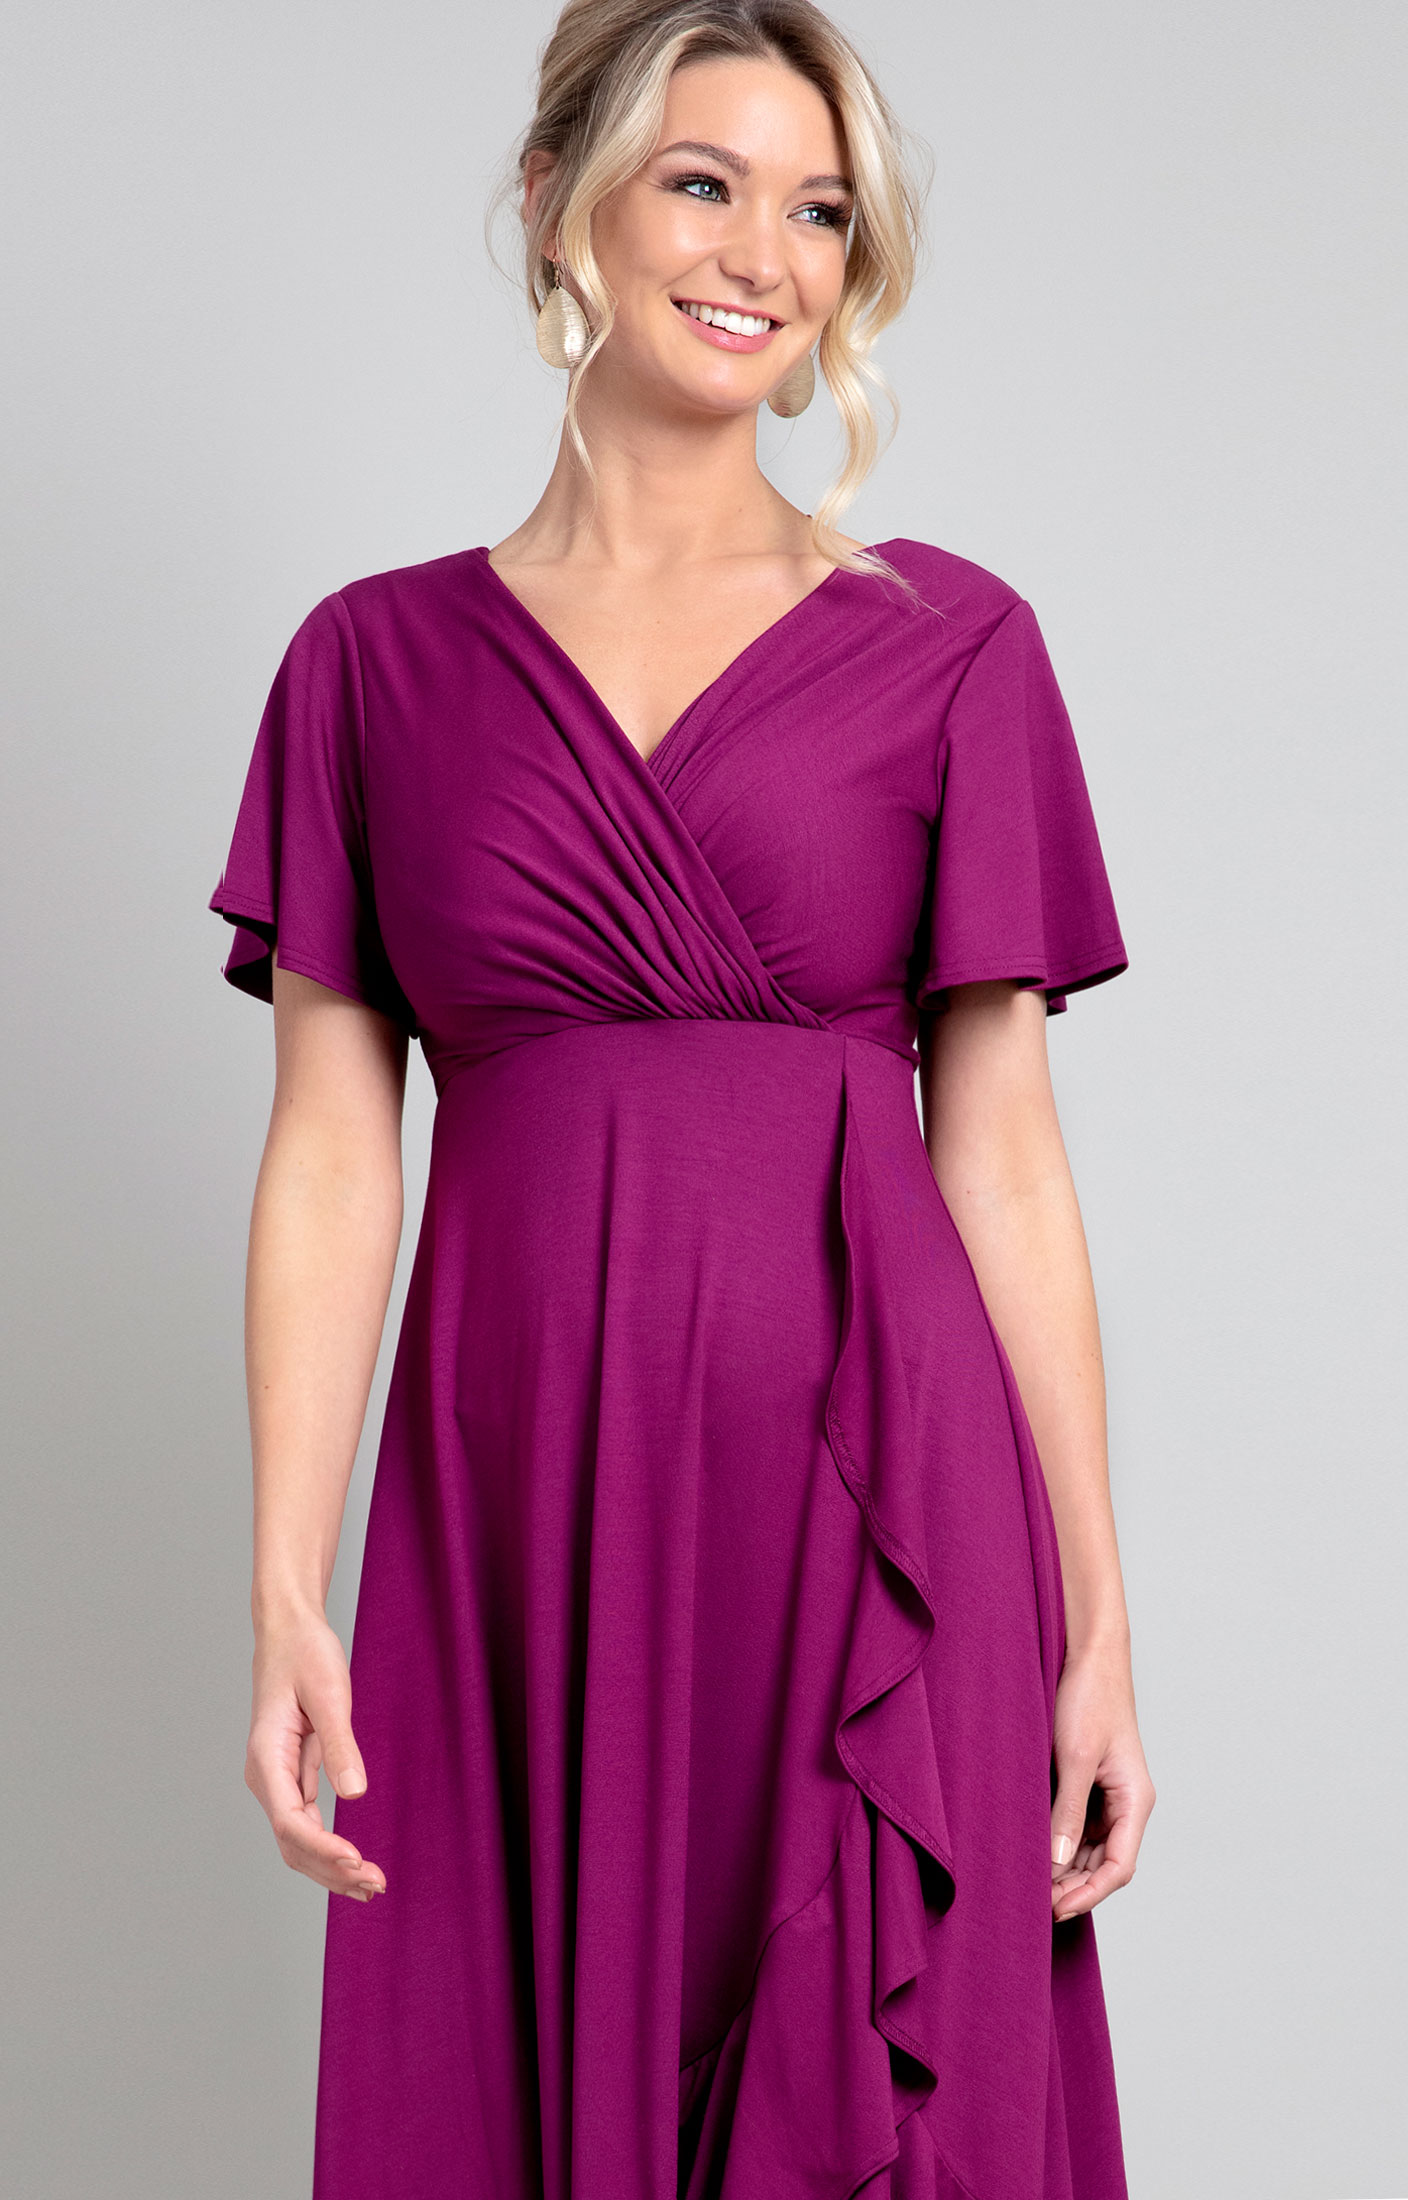 Waterfall Dress Boysenberry Pink - Evening Dresses, Occasion Wear and ...